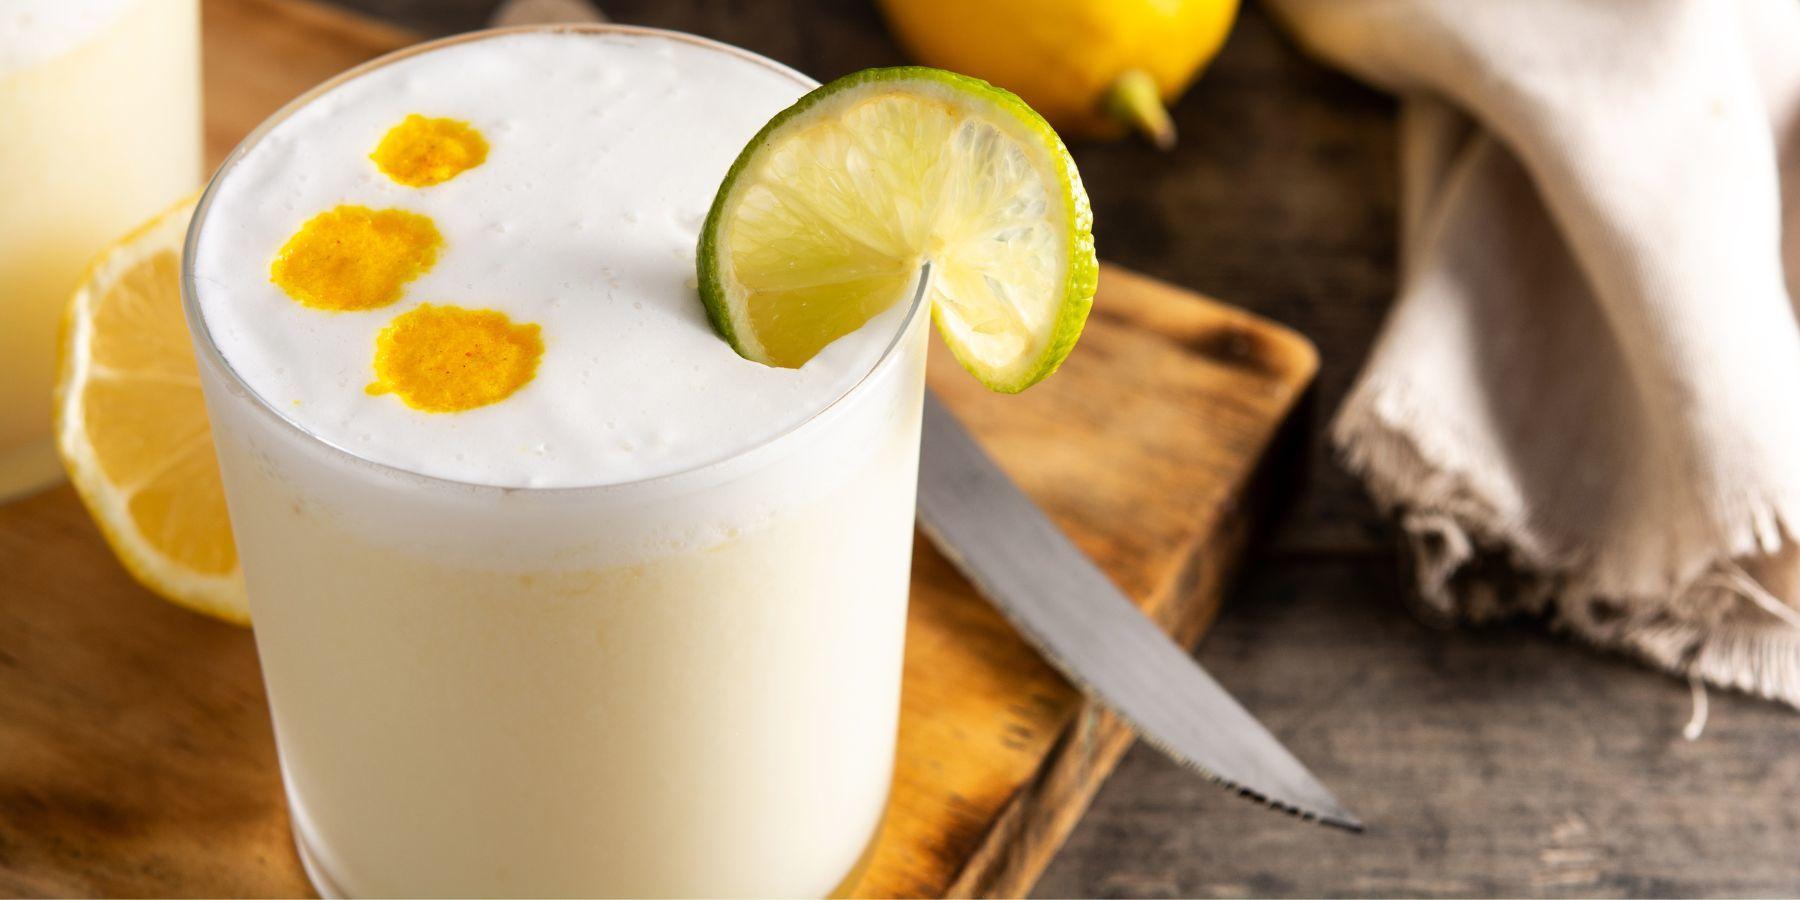 Peruvian Pisco Sour Cocktail - A Refreshing, Citrusy Sipper